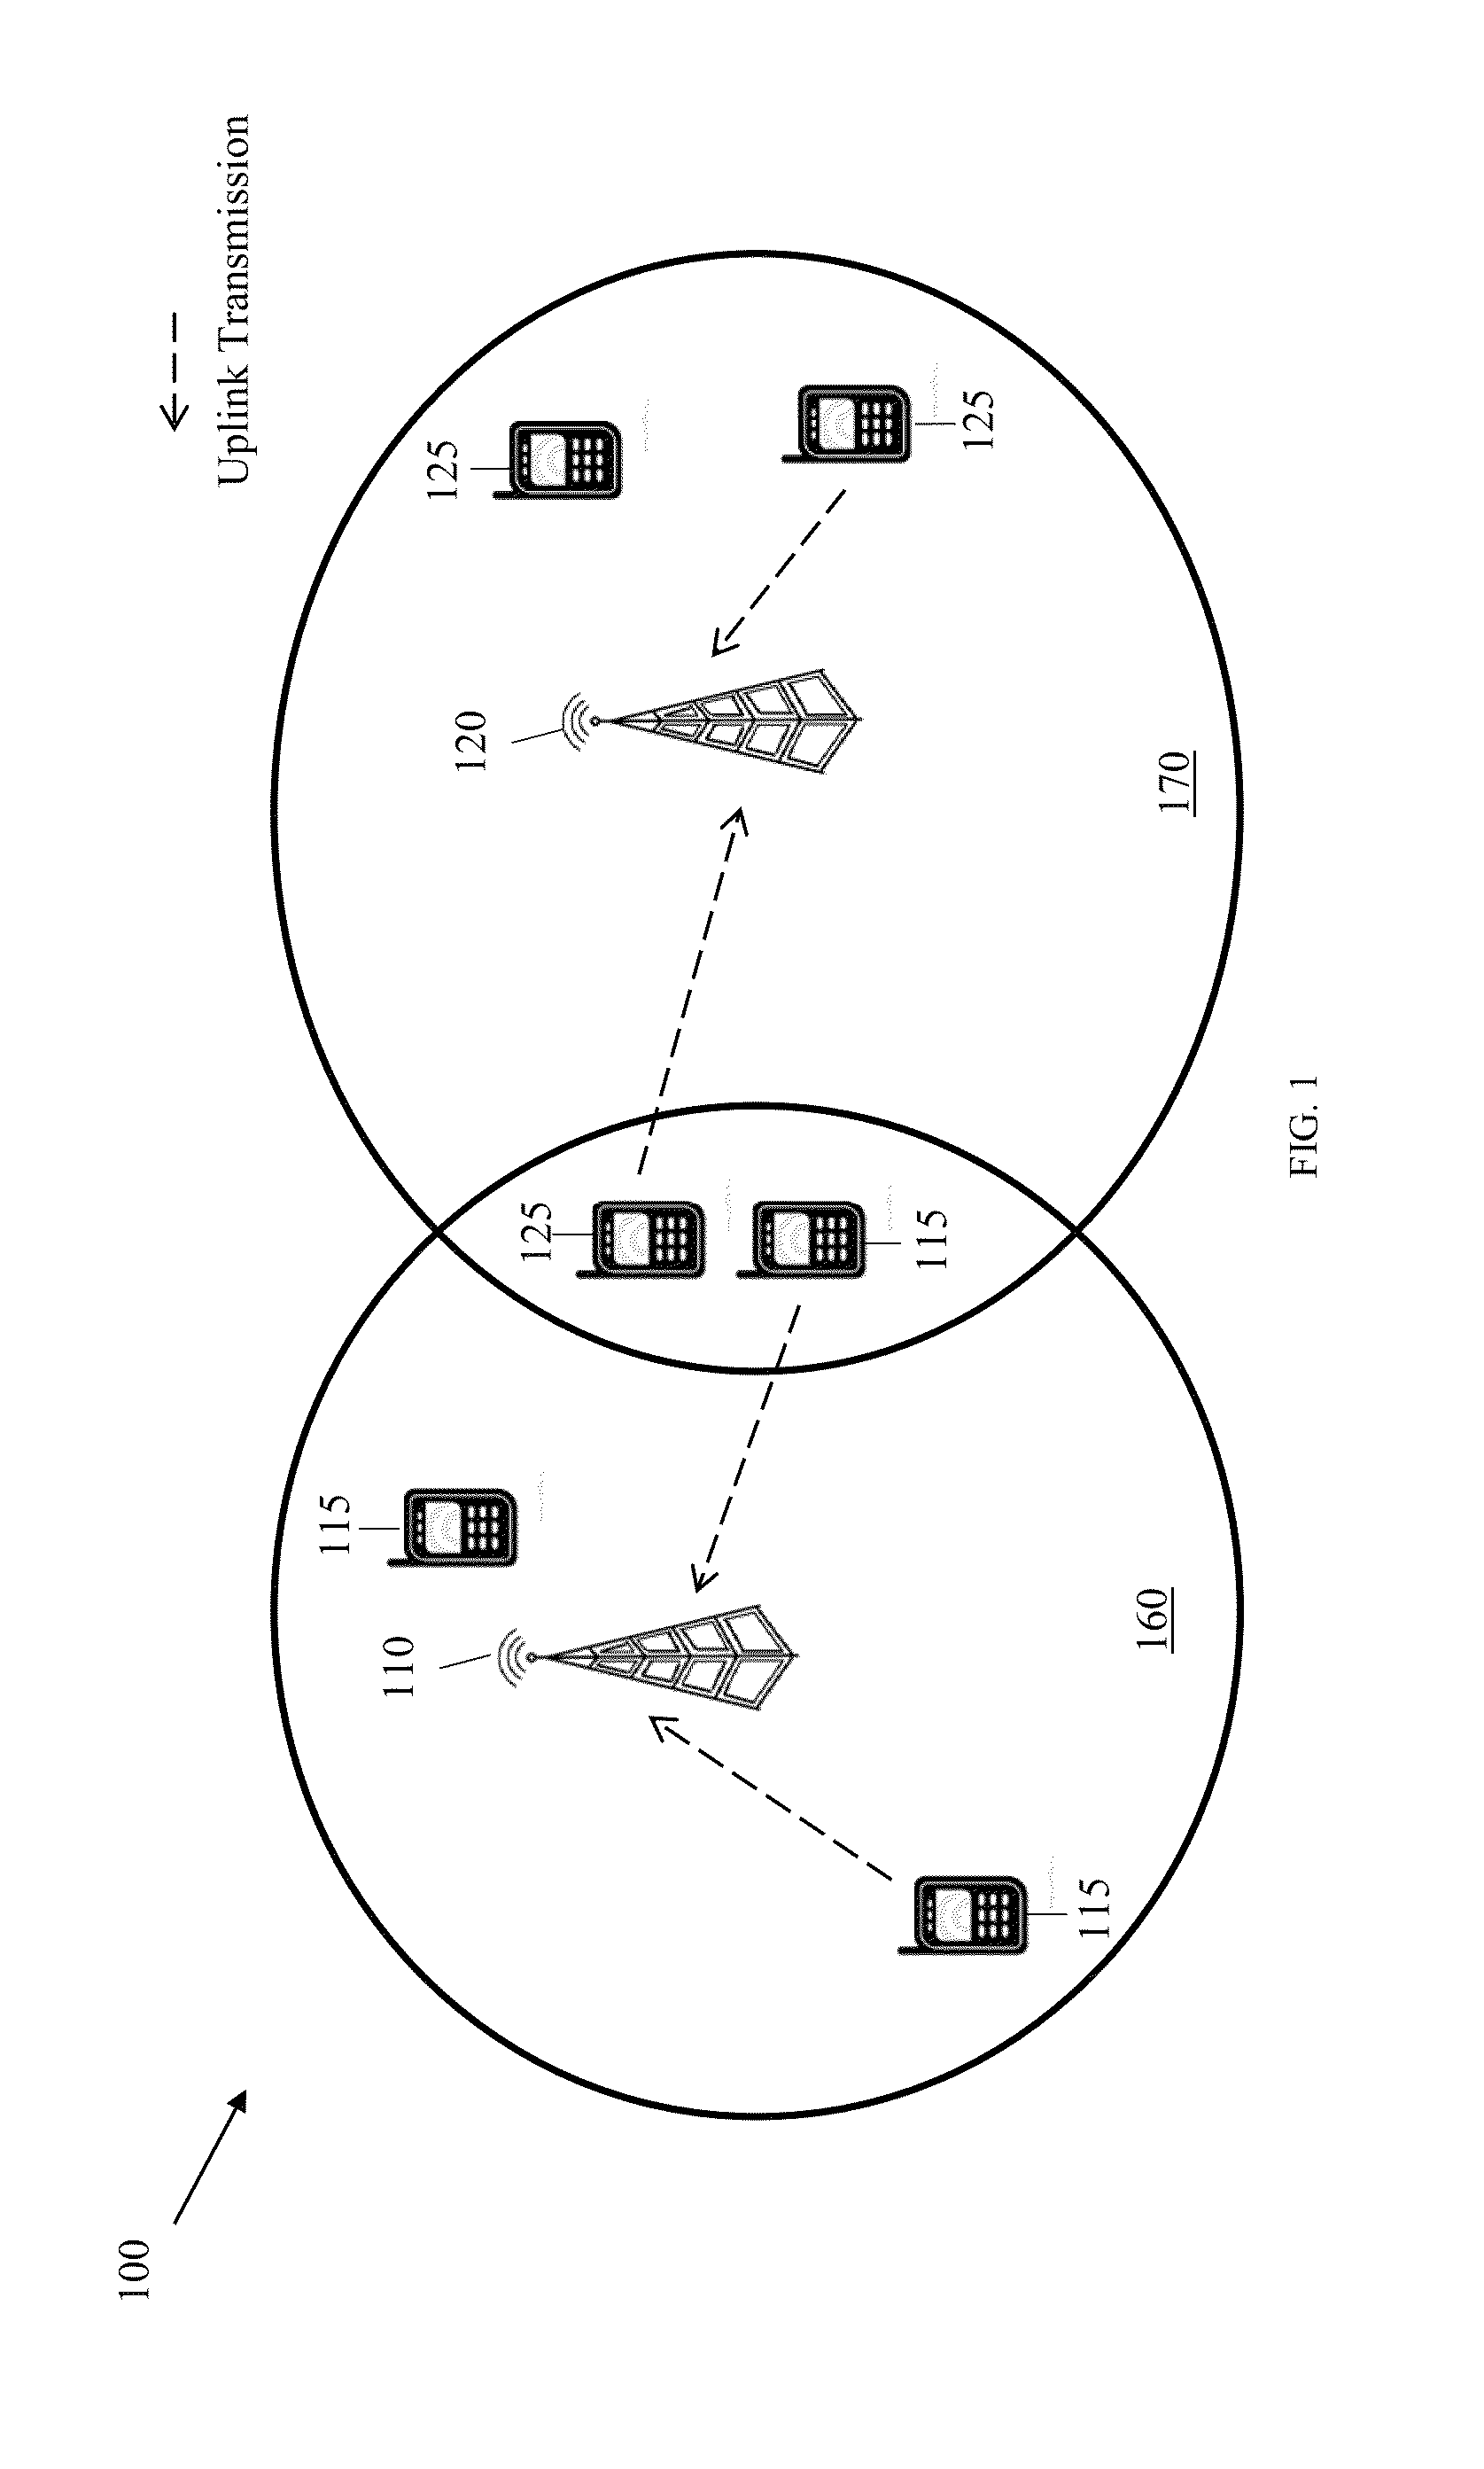 Method and System for Self-Optimized Uplink Power Control